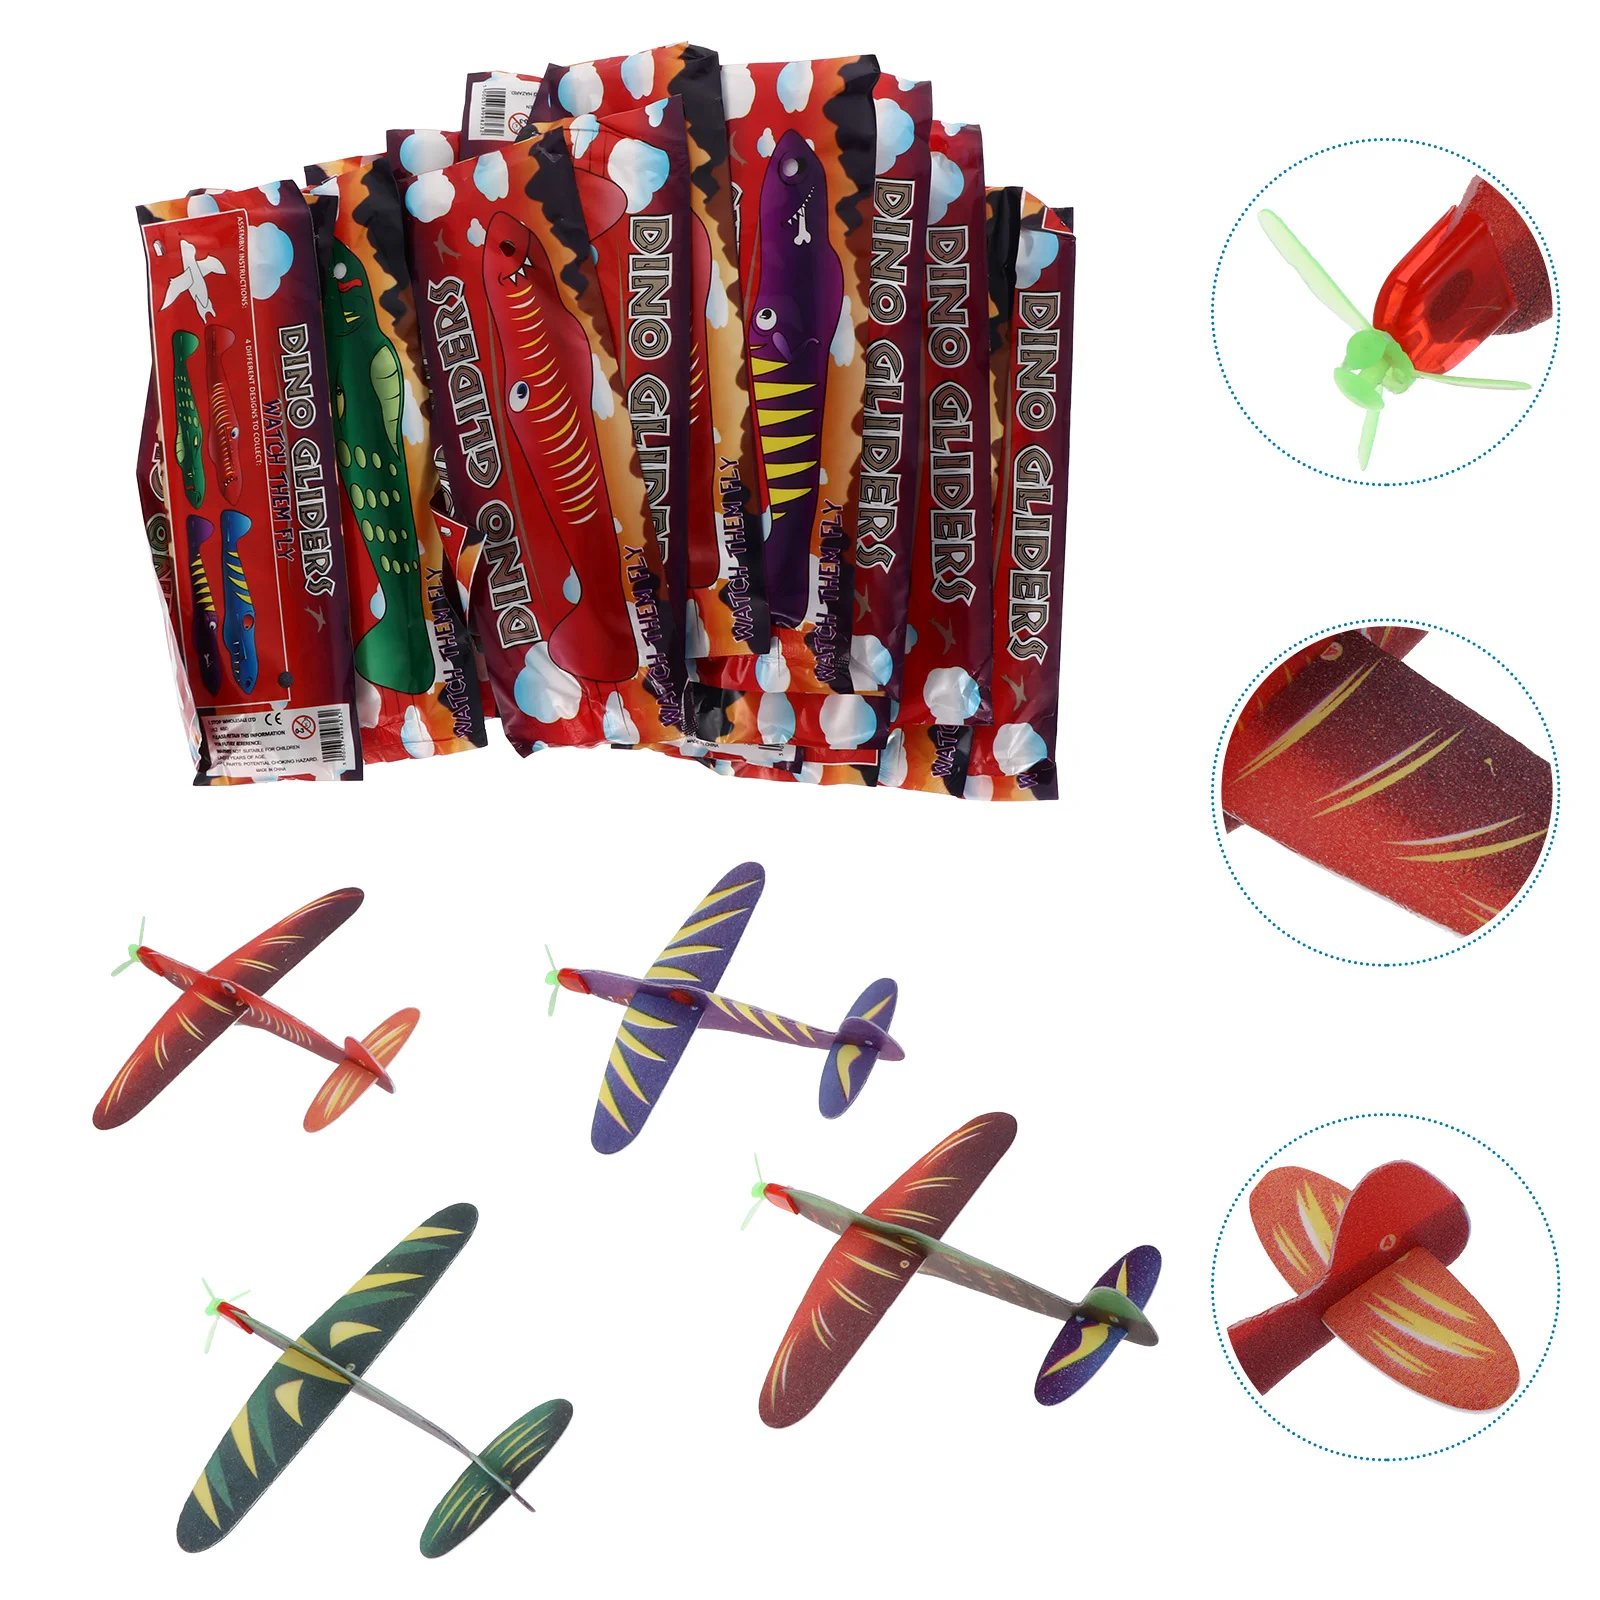 

24 Pcs Airplane Model Kidcraft Playset Foams Toy Plaything Flying Gliders Flash Small Children Kid's Outdoor Planes